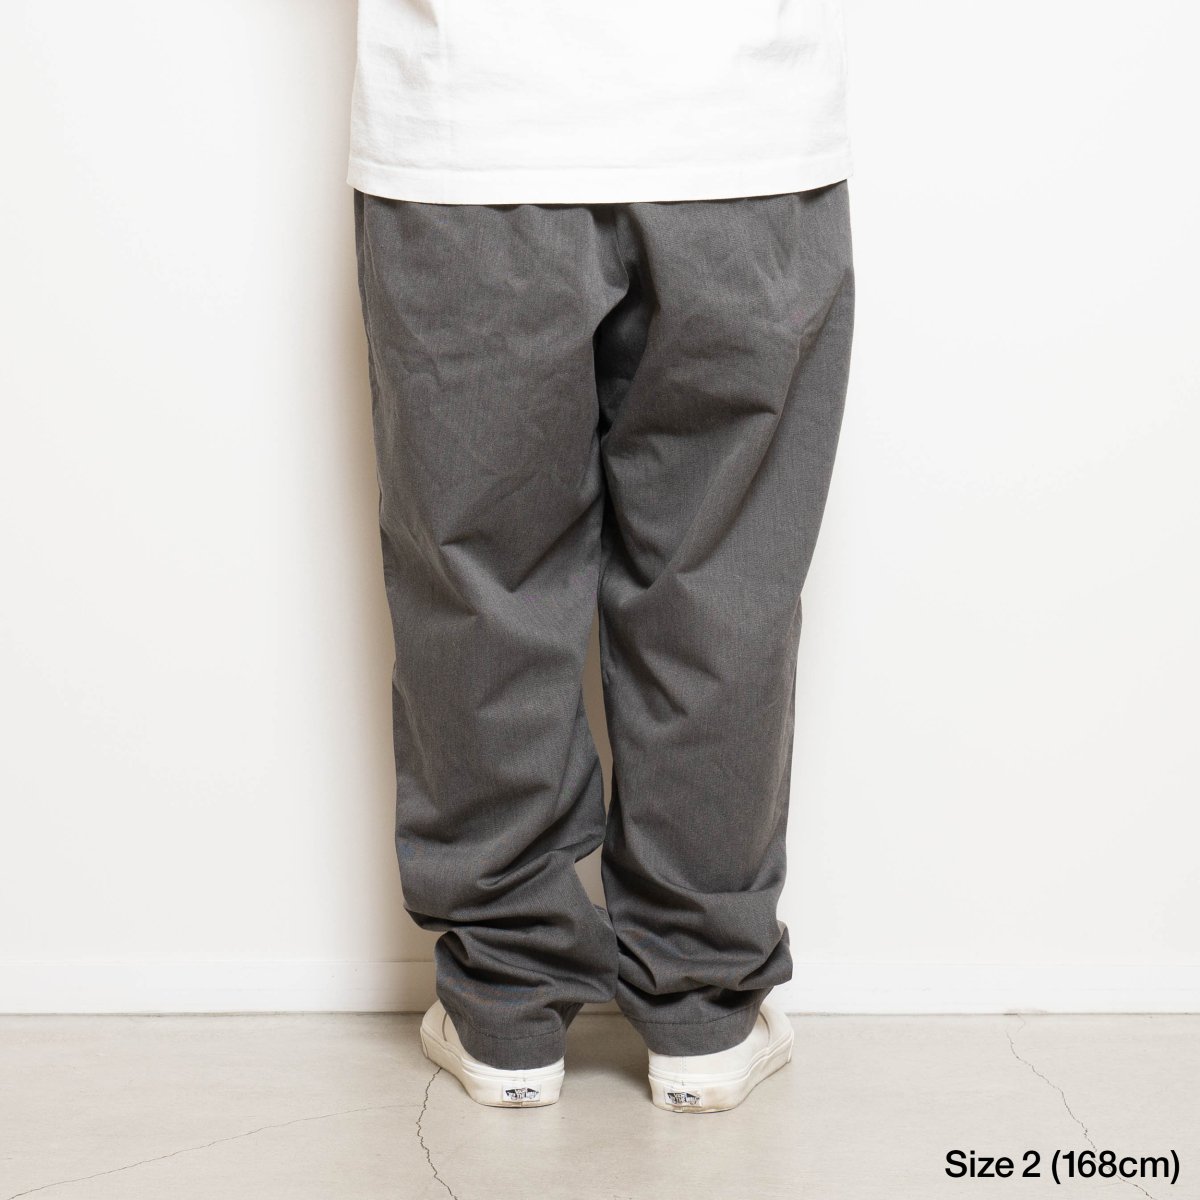 TC Twill Easy Pants - Heather Grey - CUP AND CONE